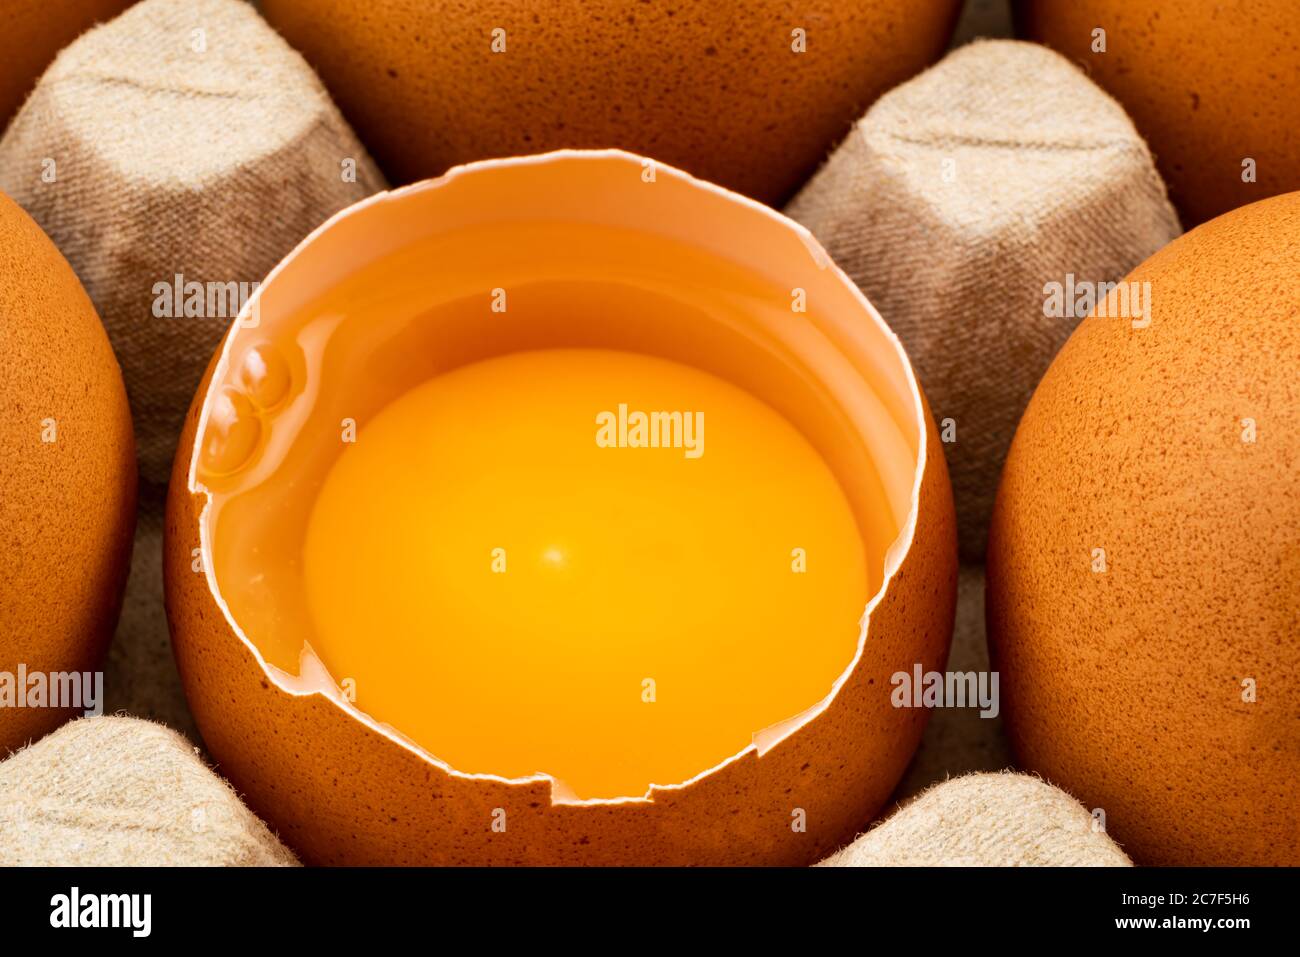 Half broken chicken egg and brown chicken eggs in egg carton on the table. Eggs are loaded with Choline, an important nutrient for the brain. Stock Photo